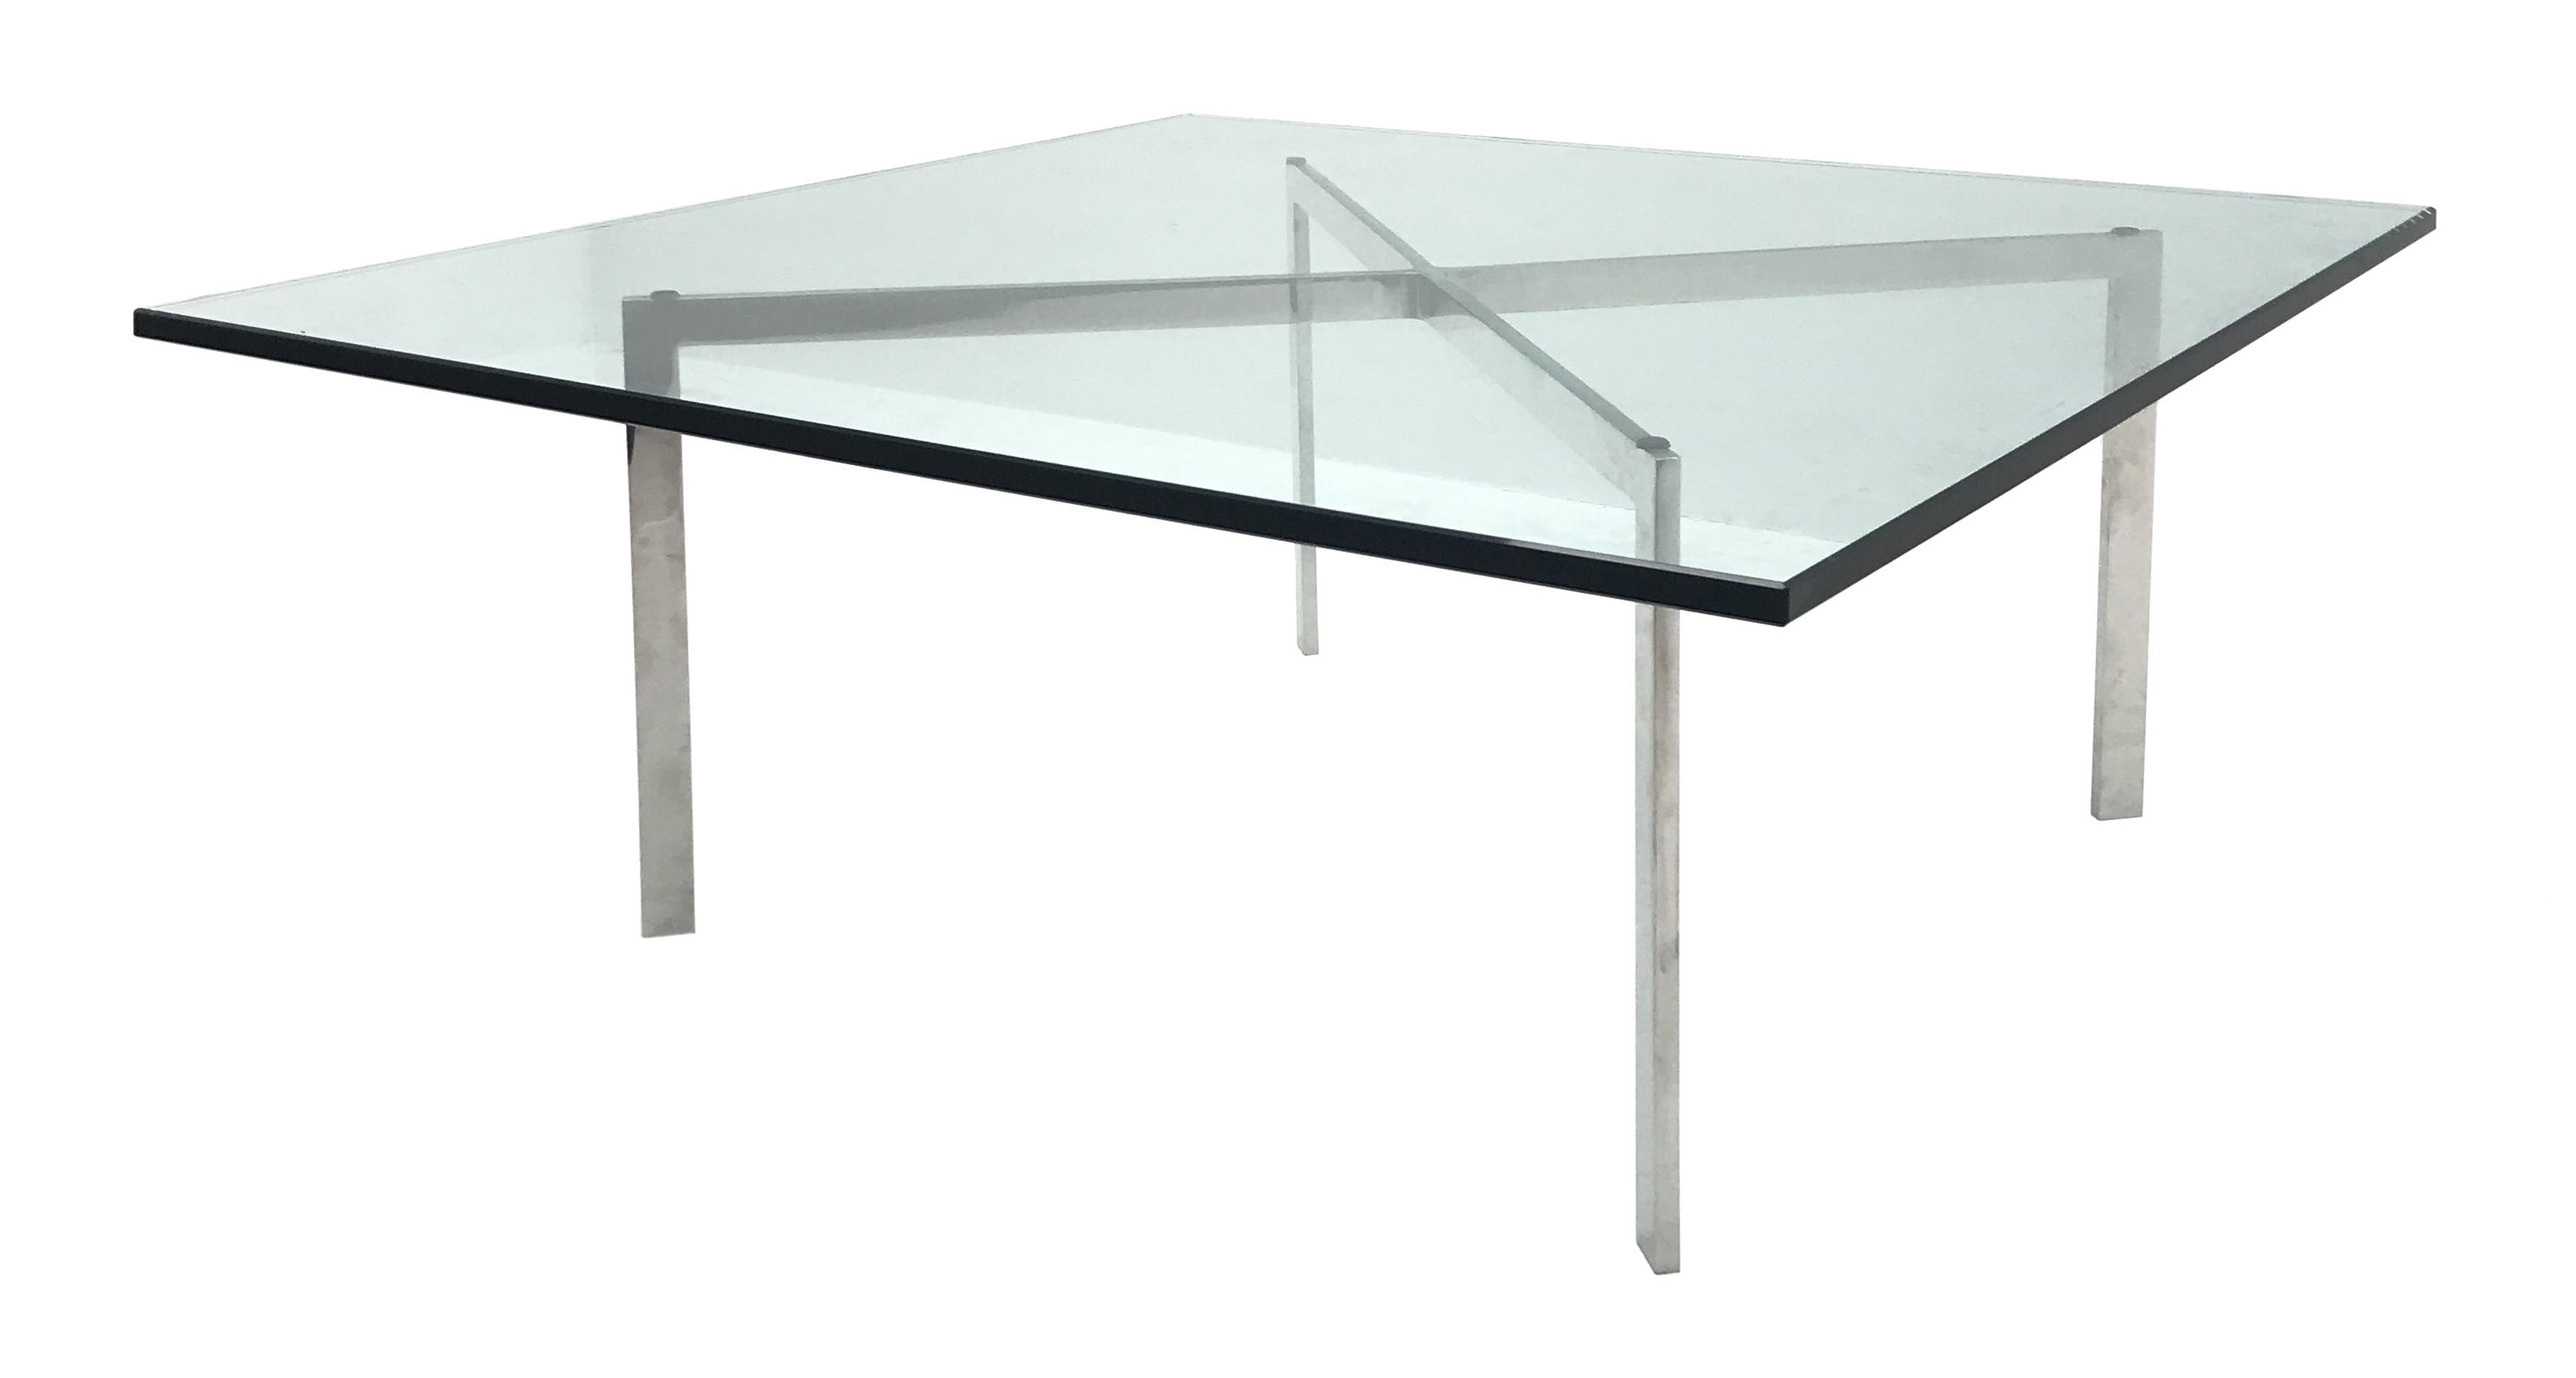 Square glass top coffee table, 'X' framed chrome supports, W102cm, H43cm,